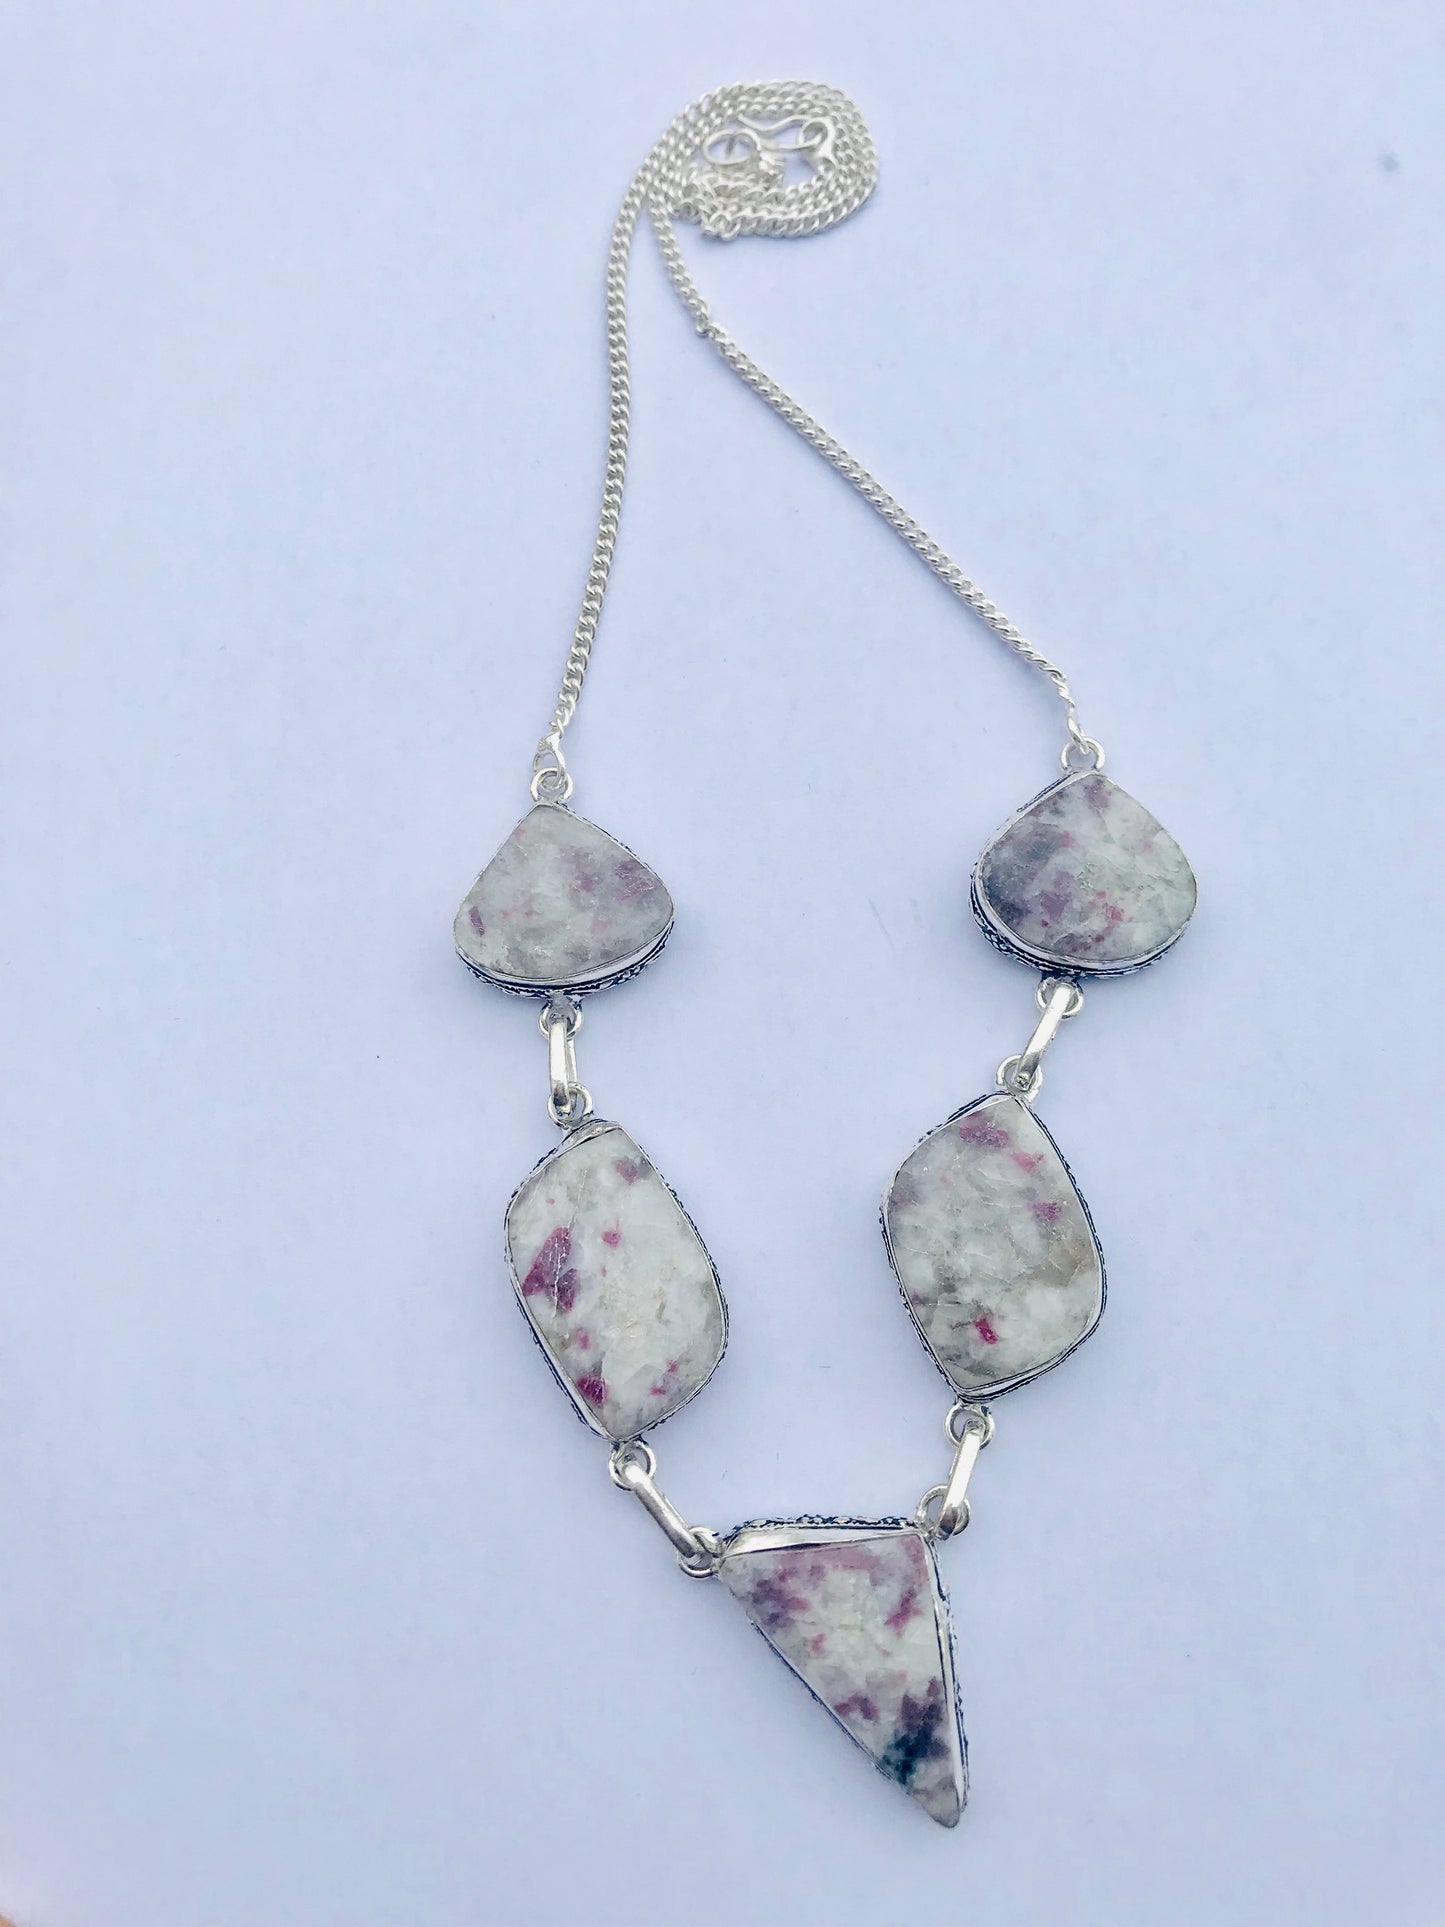 Tourmaline in Quartz Crystal Necklace - Happiness - Crystal Boutique.co.uk